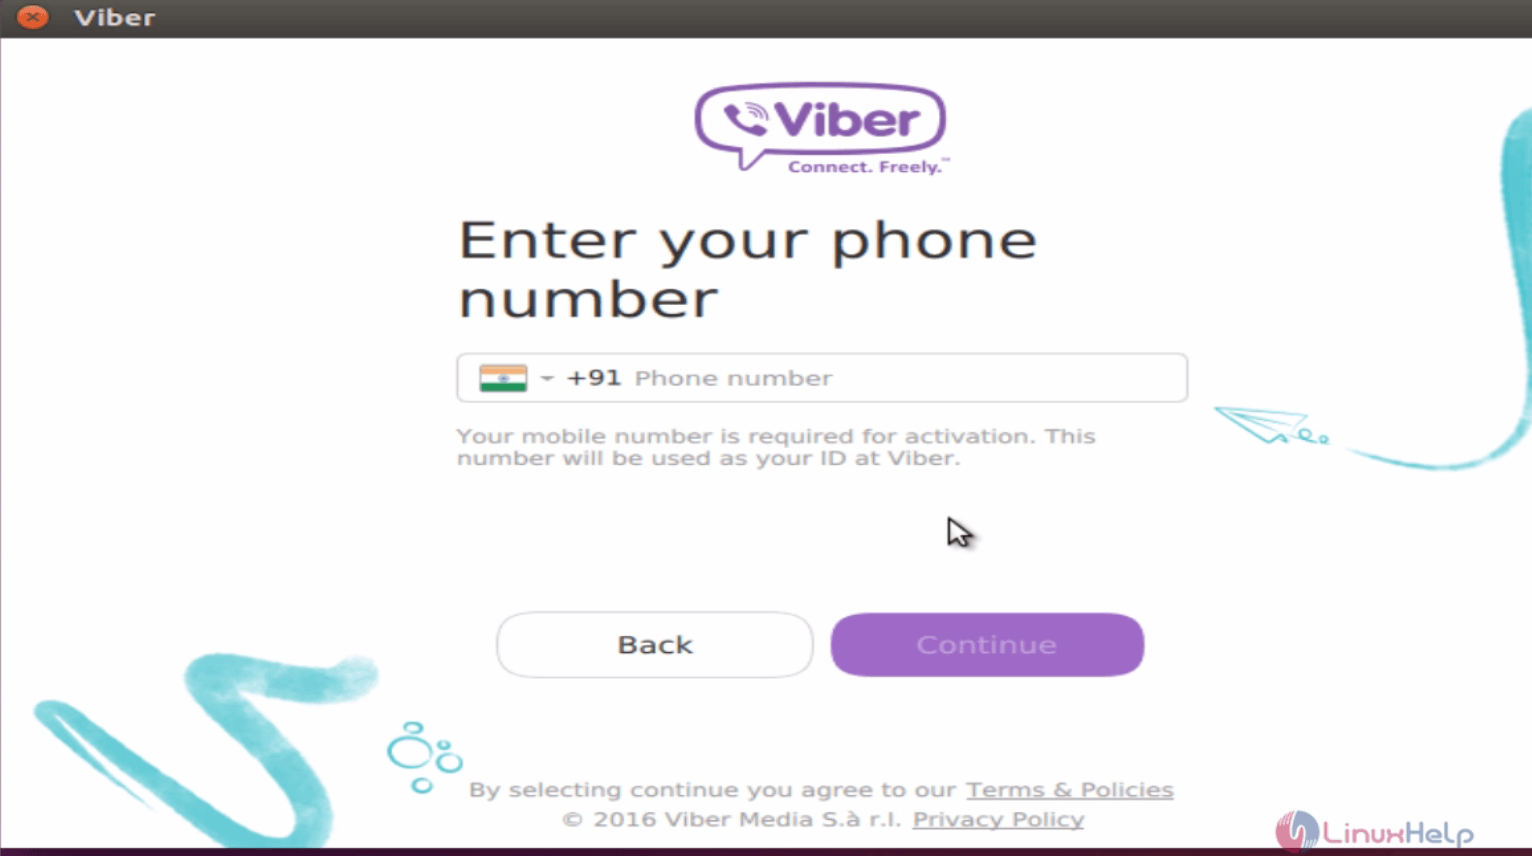 Installation-Viber-android-application-instant-messaging-and-Voice-over- IP-VoIP-Ubuntu16.4-register-mobile-number